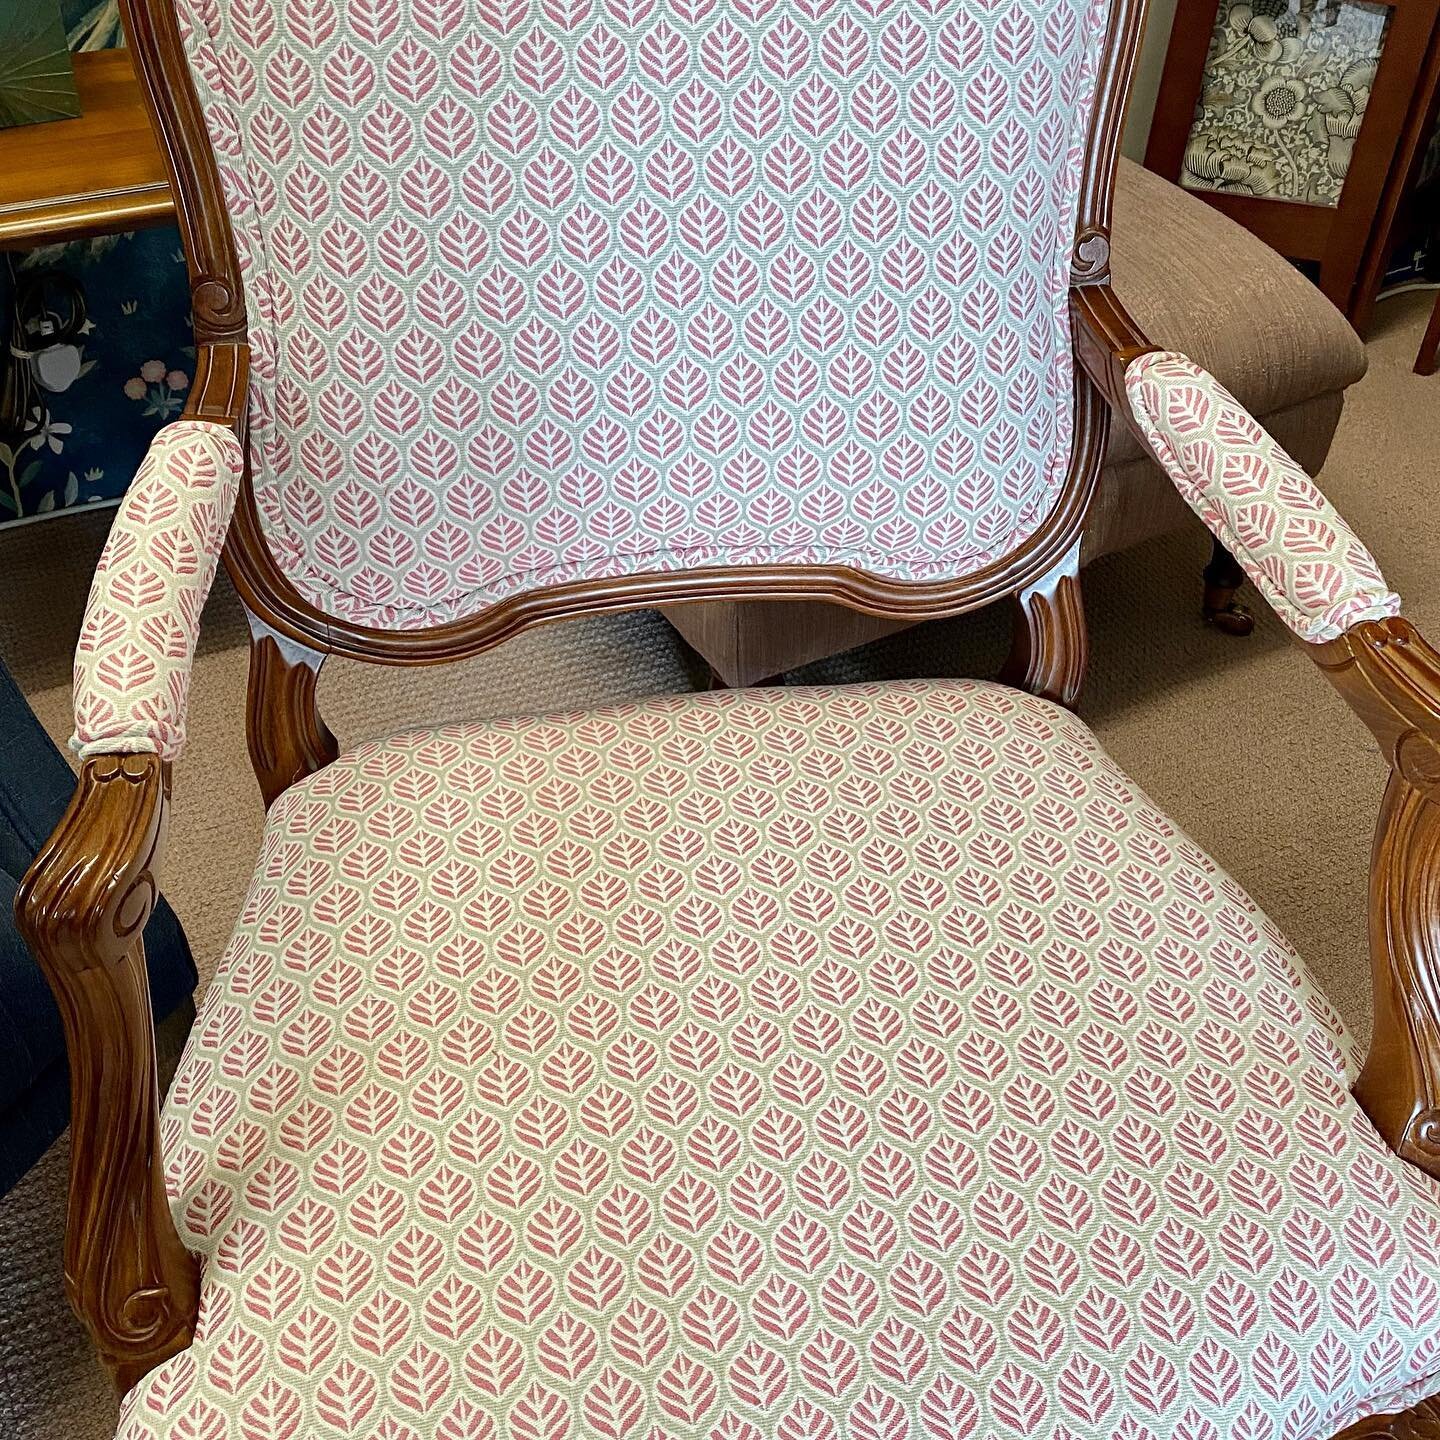 Beautifully re-upholstered in gorgeous Jane Churchill fabric attention to detail @janechurchillfabrics #janechurchill #upholstery#designerfabrics #homedesign